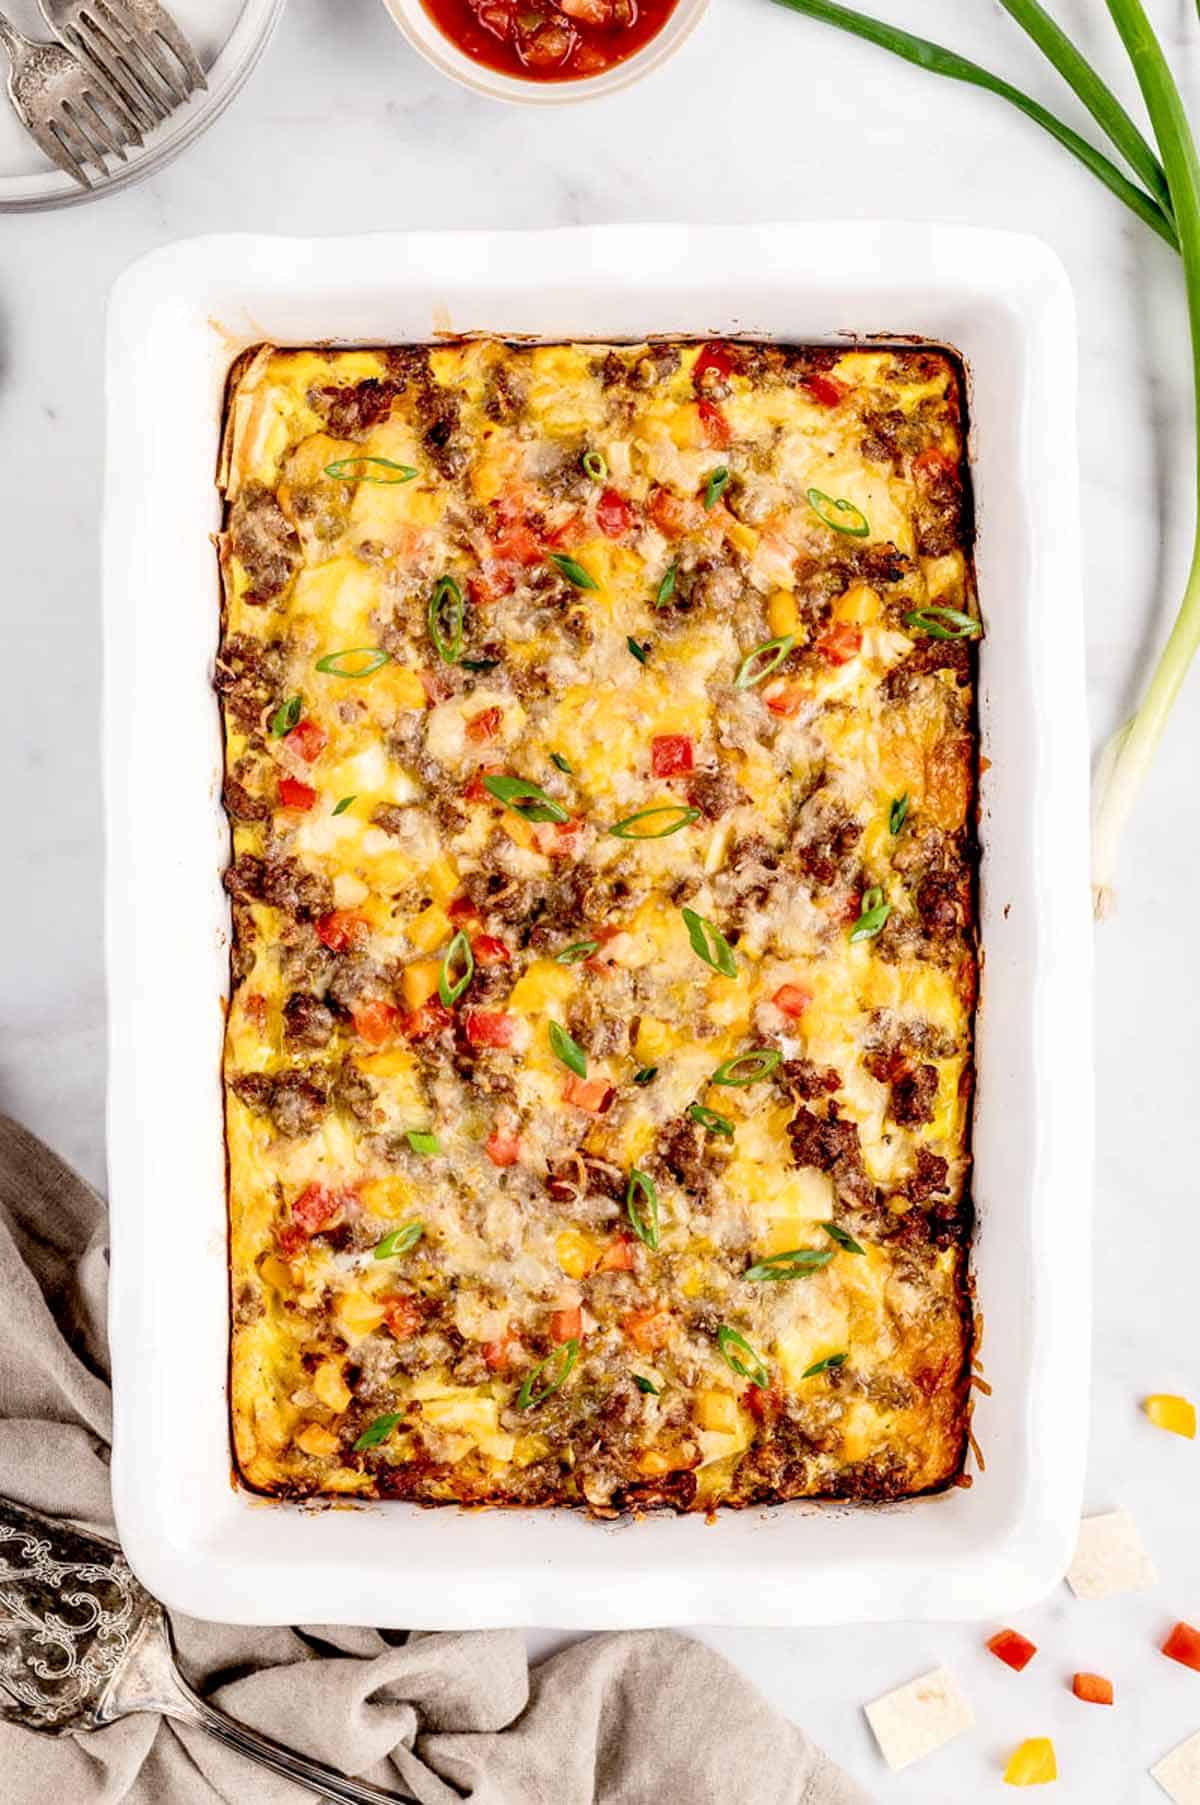 The baked breakfast burrito casserole in a baking dish ready to be served.